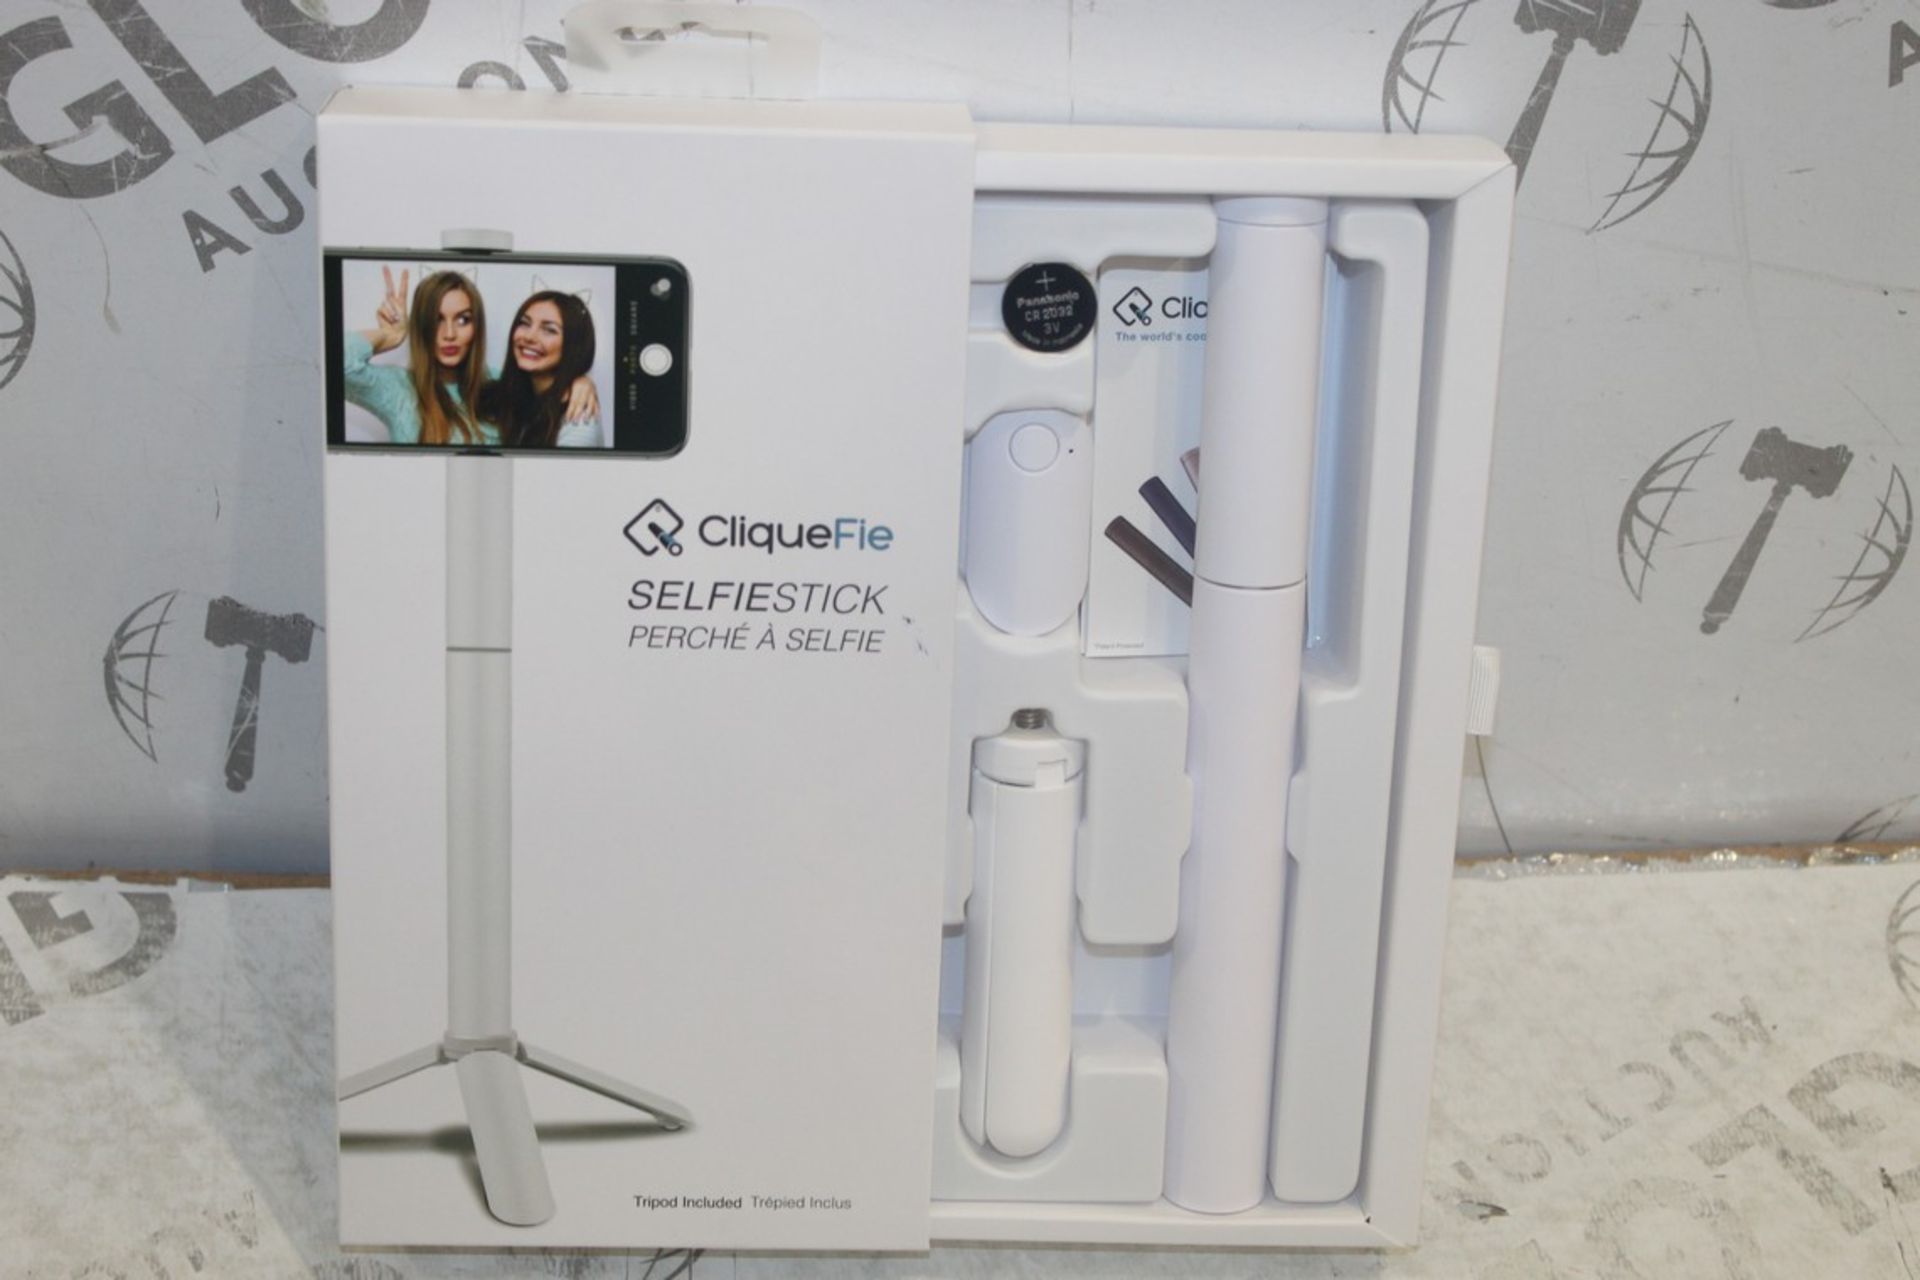 Box To Contain 6 Cliquefie Selfie Sticks Combined RRP £360 (Pictures Are For Illustration Purposes